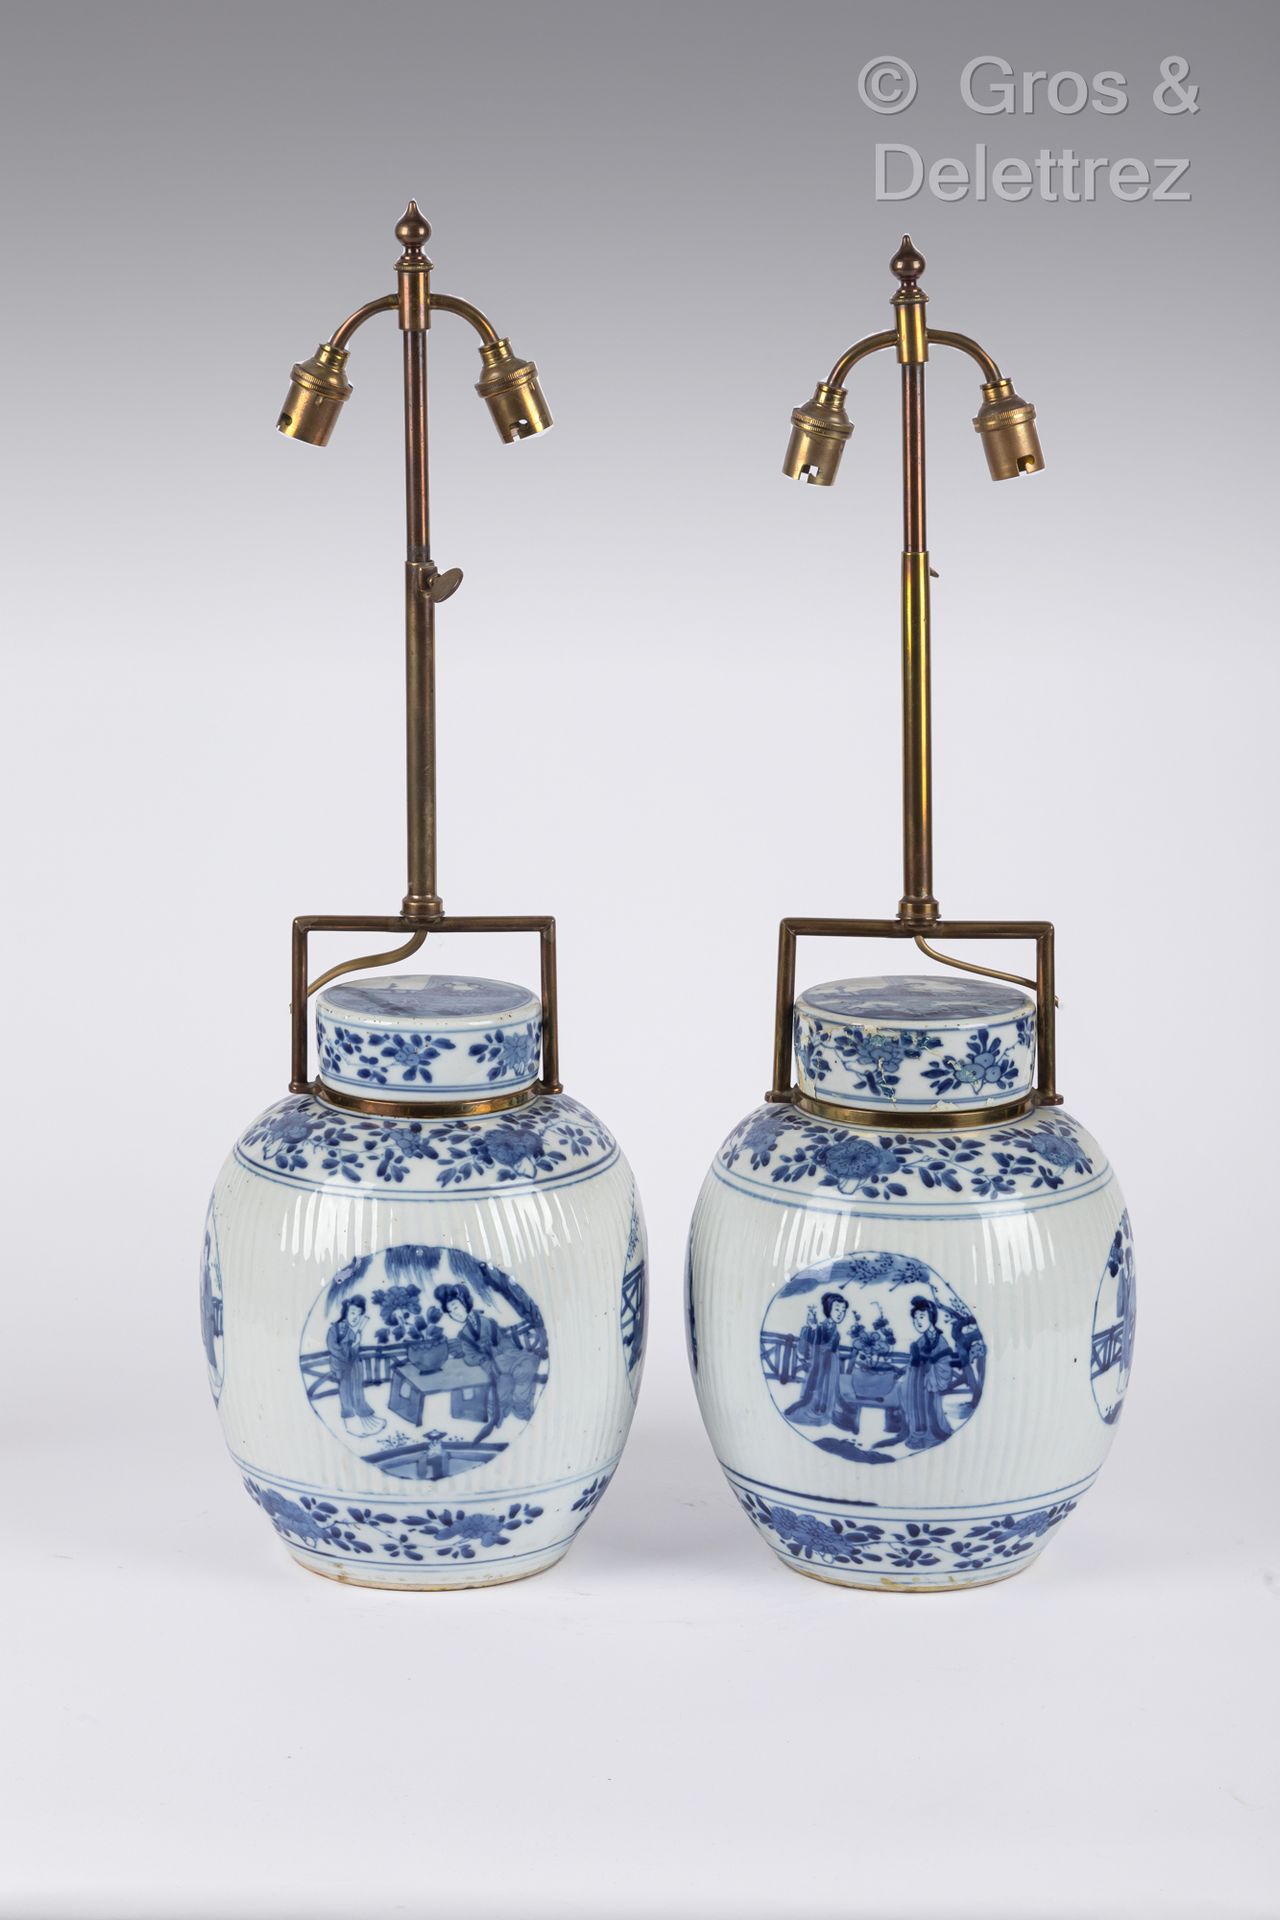 Null CHINA, Kangxi period (1662-1722)
Pair of covered "ginger" pots in blue-whit&hellip;